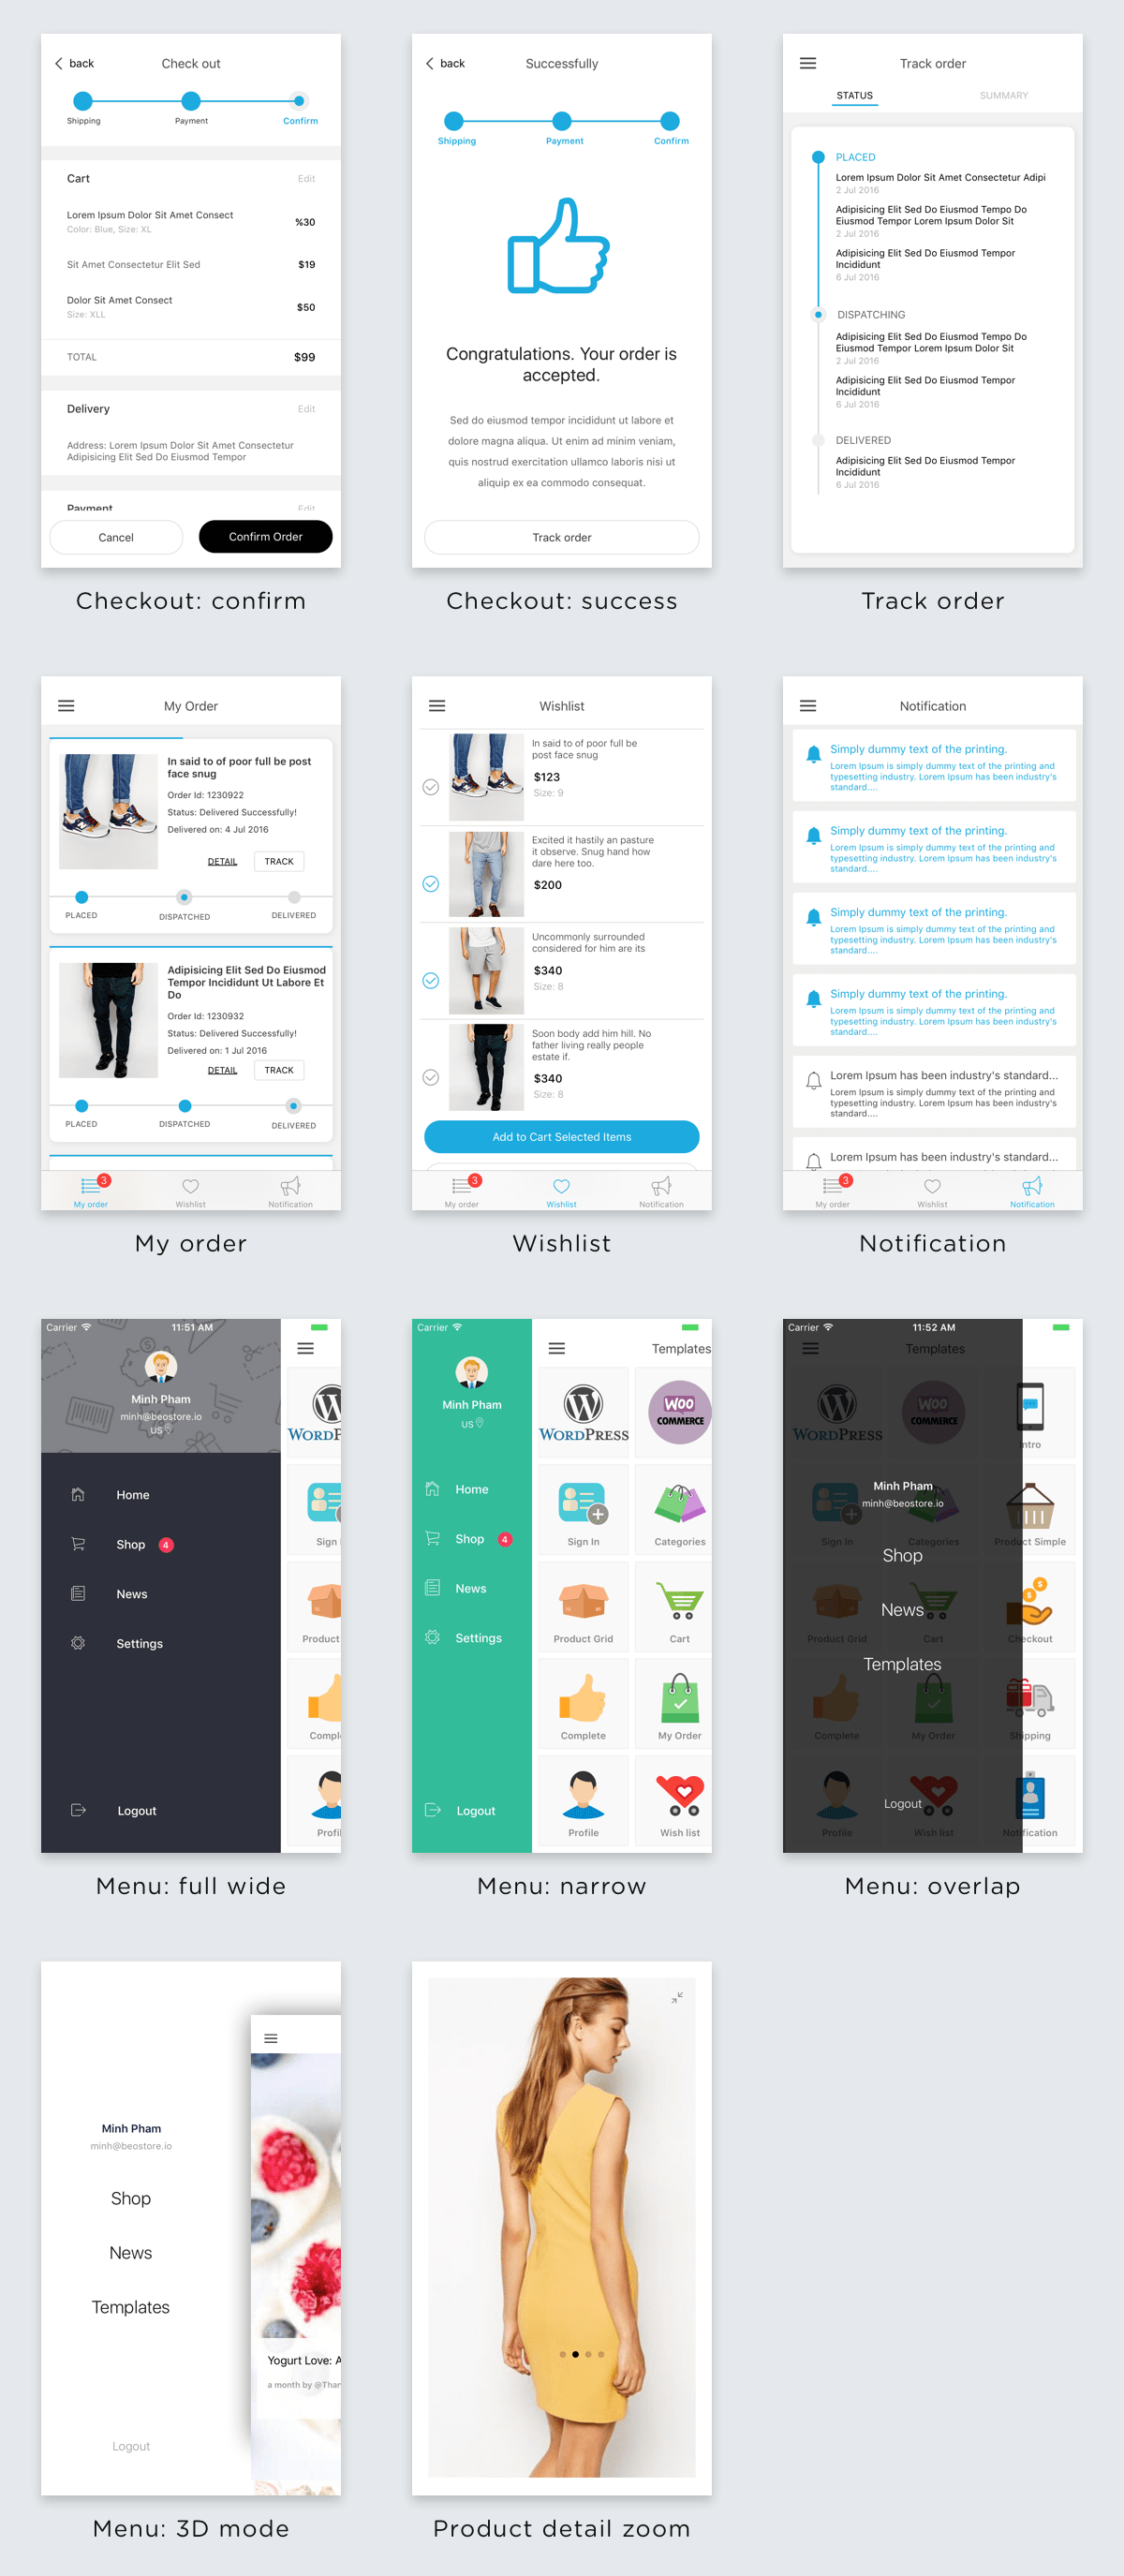 Beostore - Complete Mobile Ui Template For React Native - 7